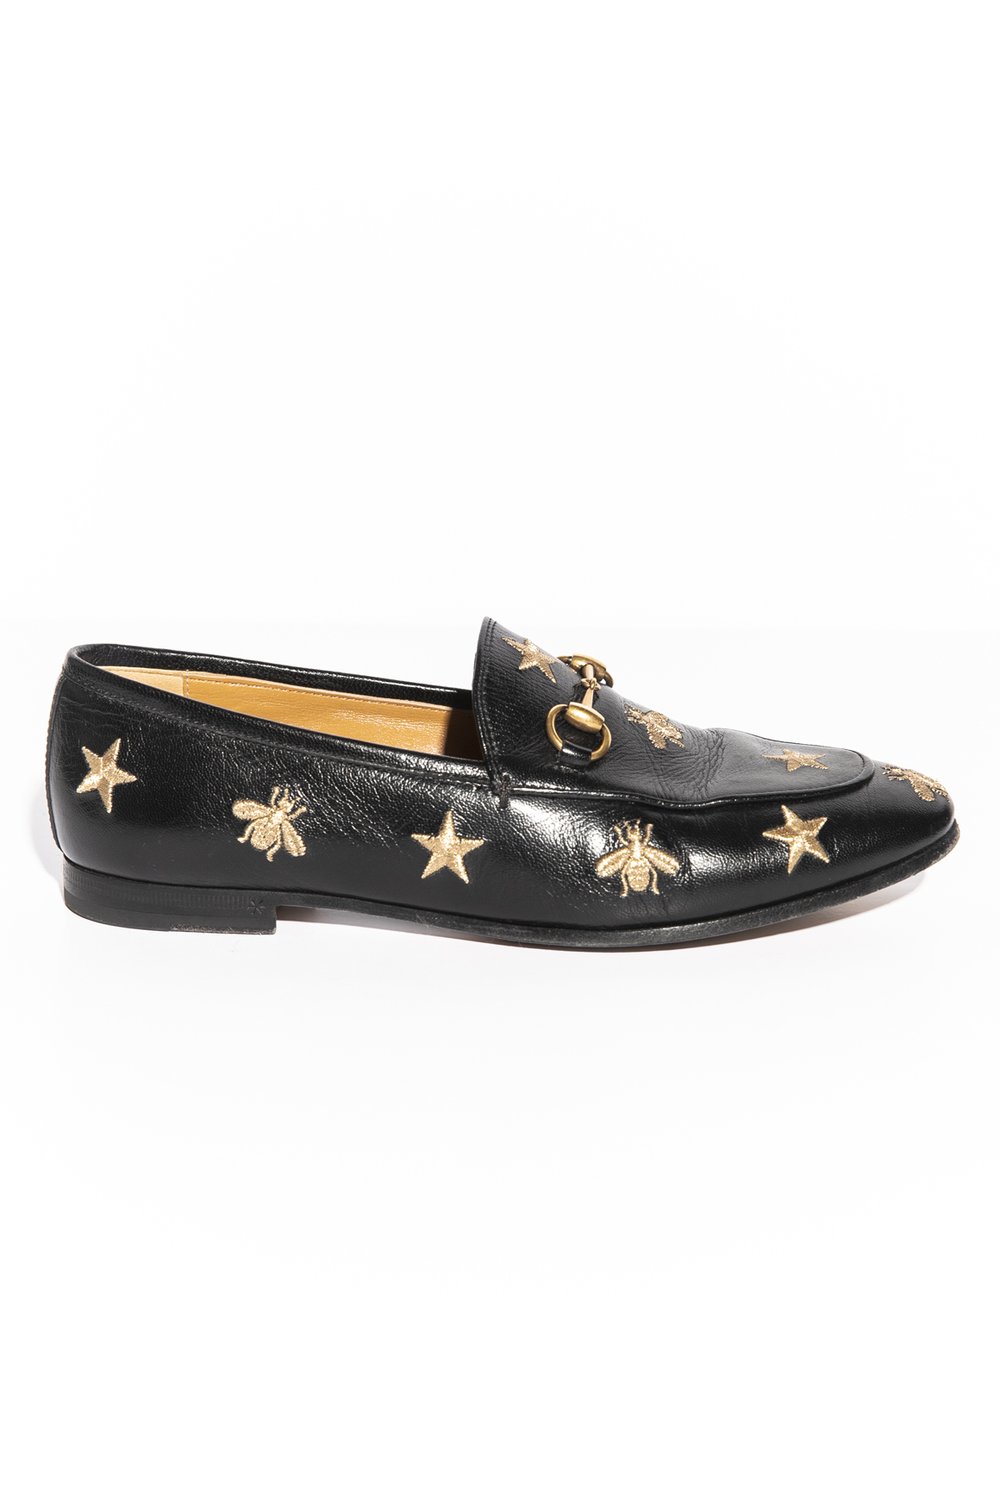 GUCCI Black & Embroidered Loafers (Sz. 37) — MOSS Consignment